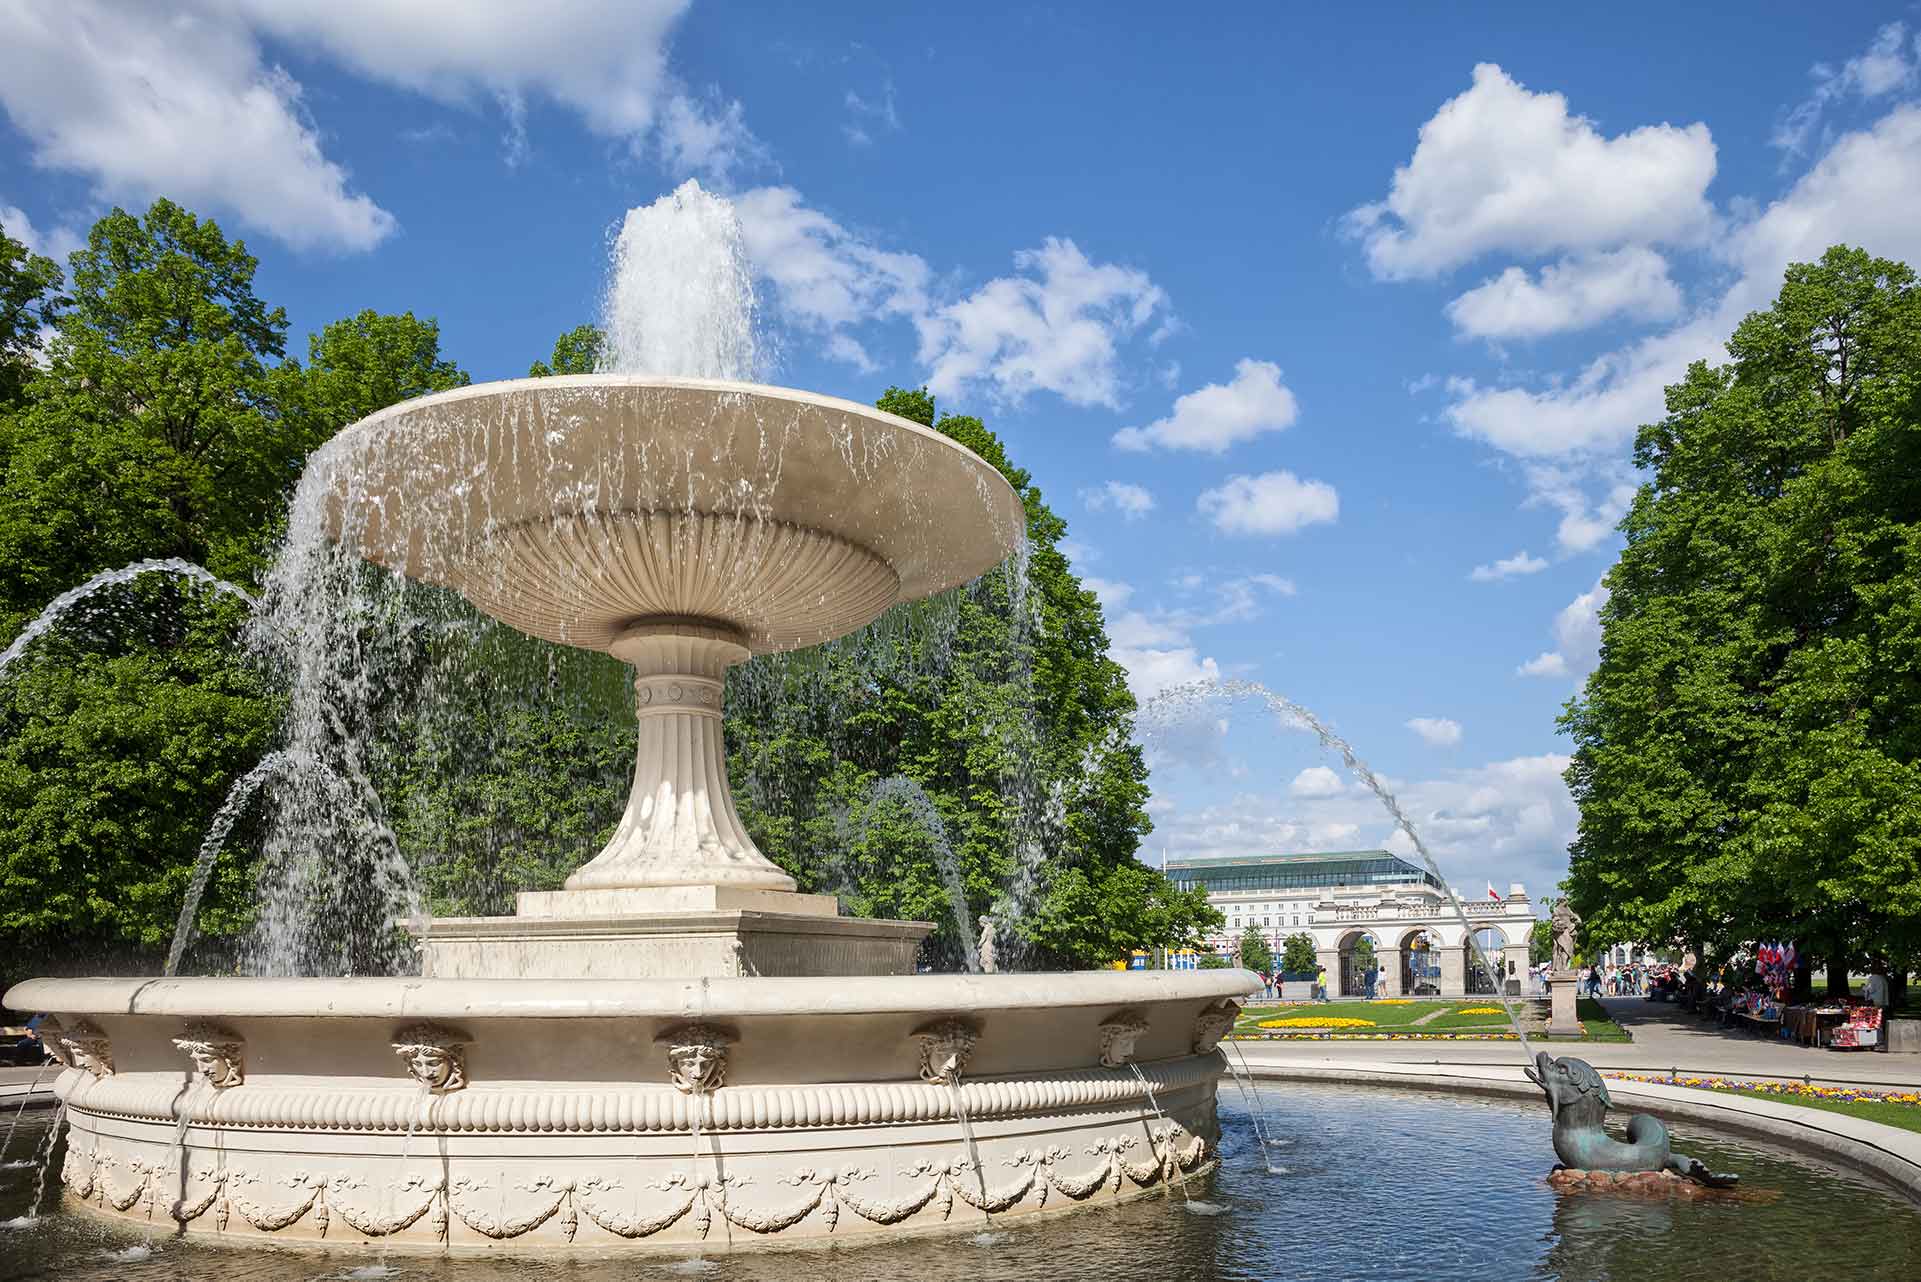 Fountain from 1855 in the Saxon Garden in city of Warsaw, Poland, 17th century park in the city center, open to public in 1727